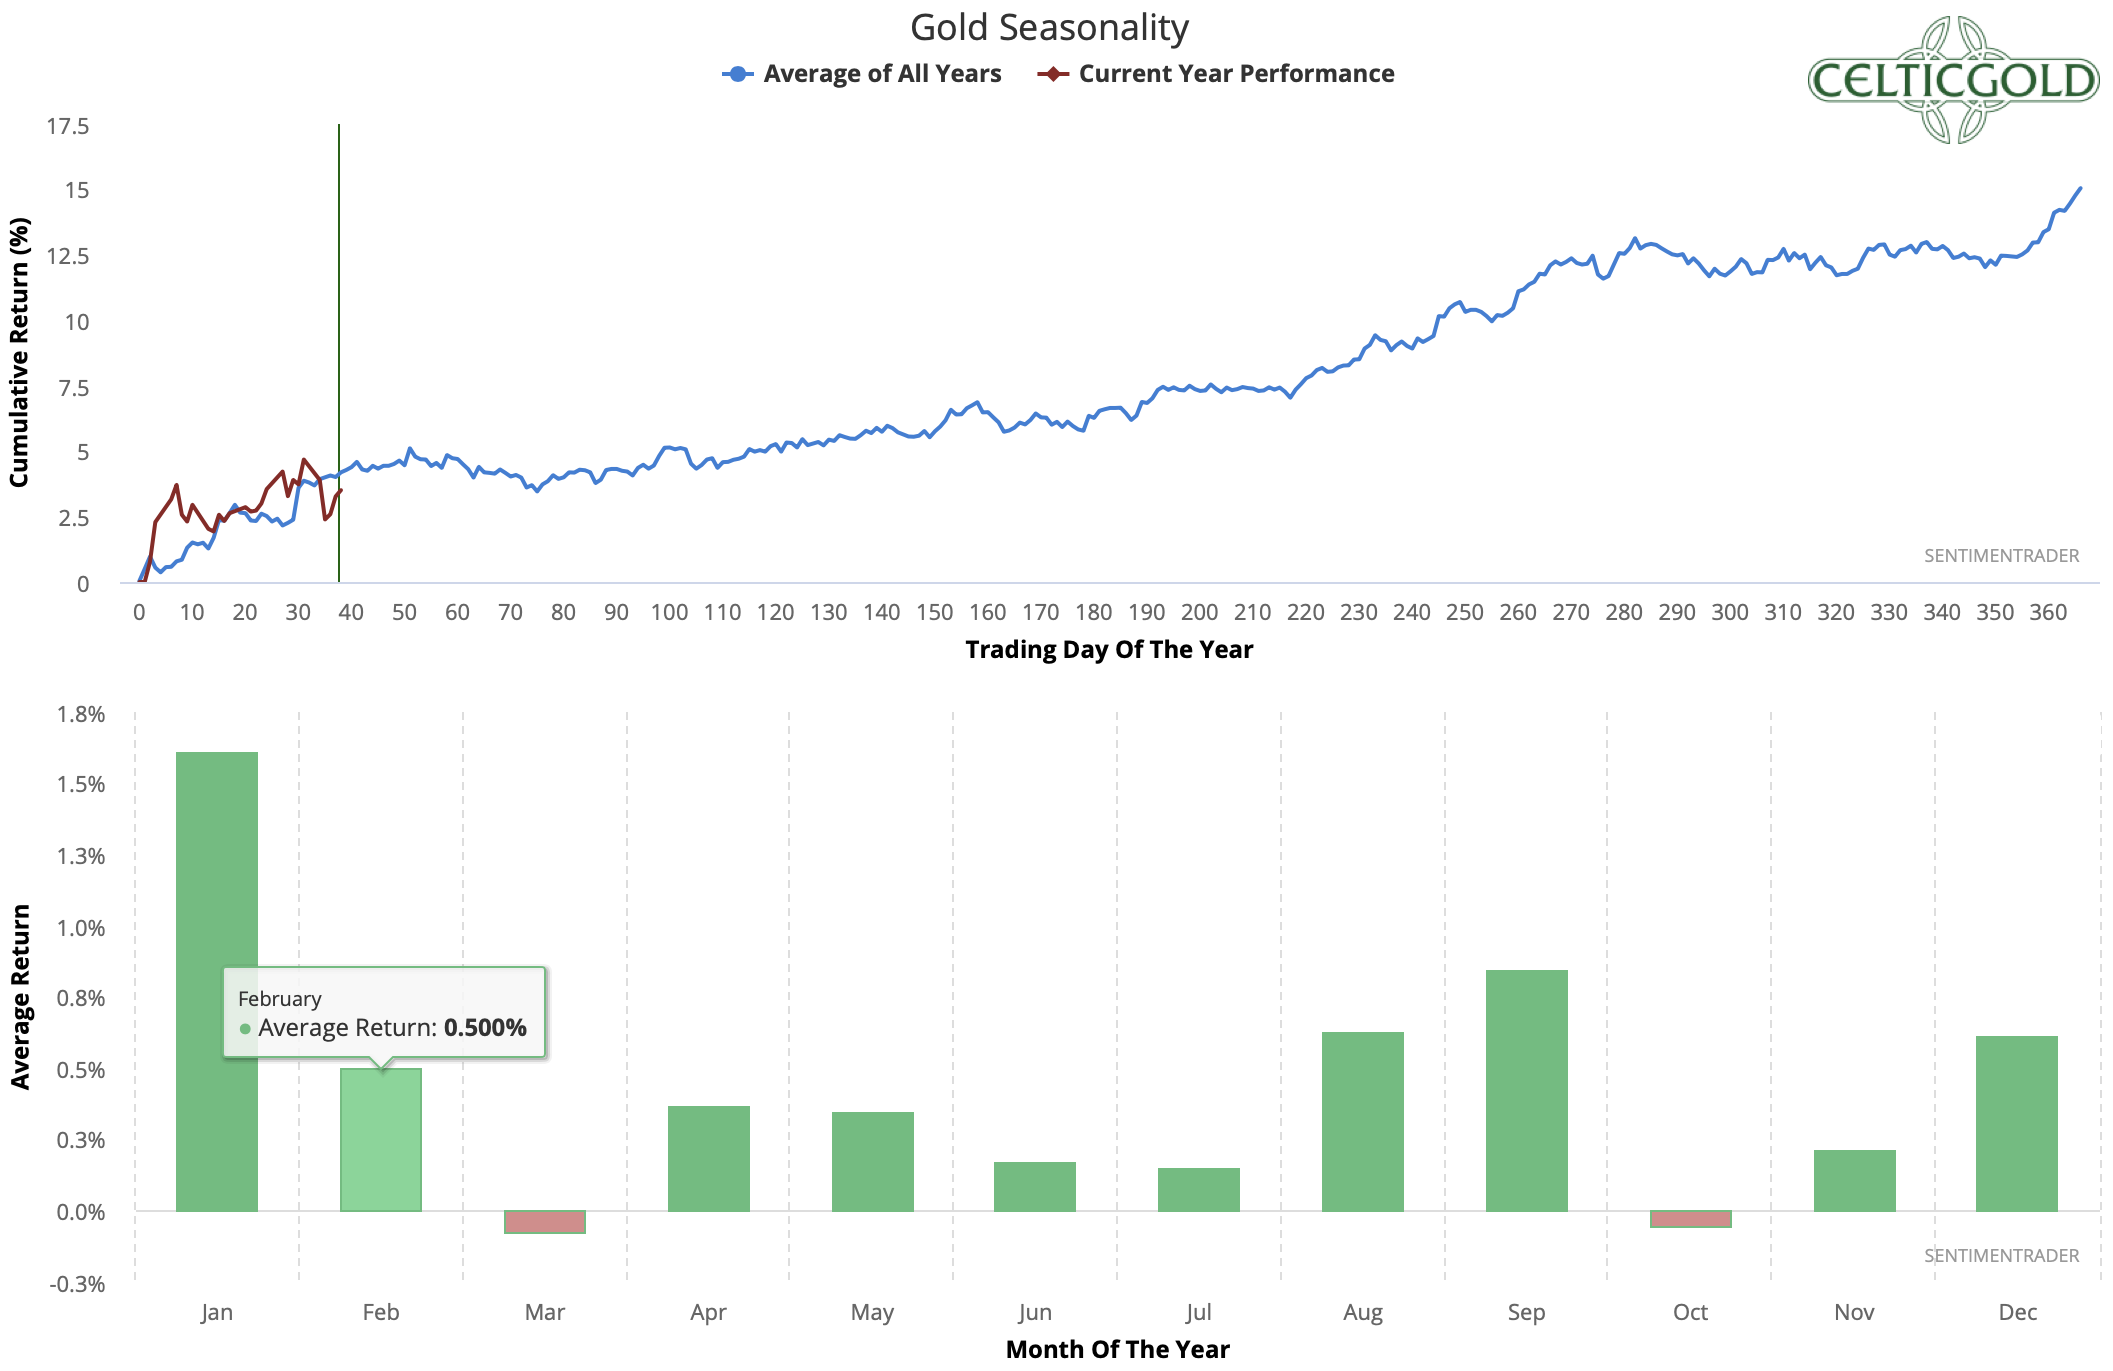 Seasonality for Gold as of February 10th, 2020. Source: Sentimentrader